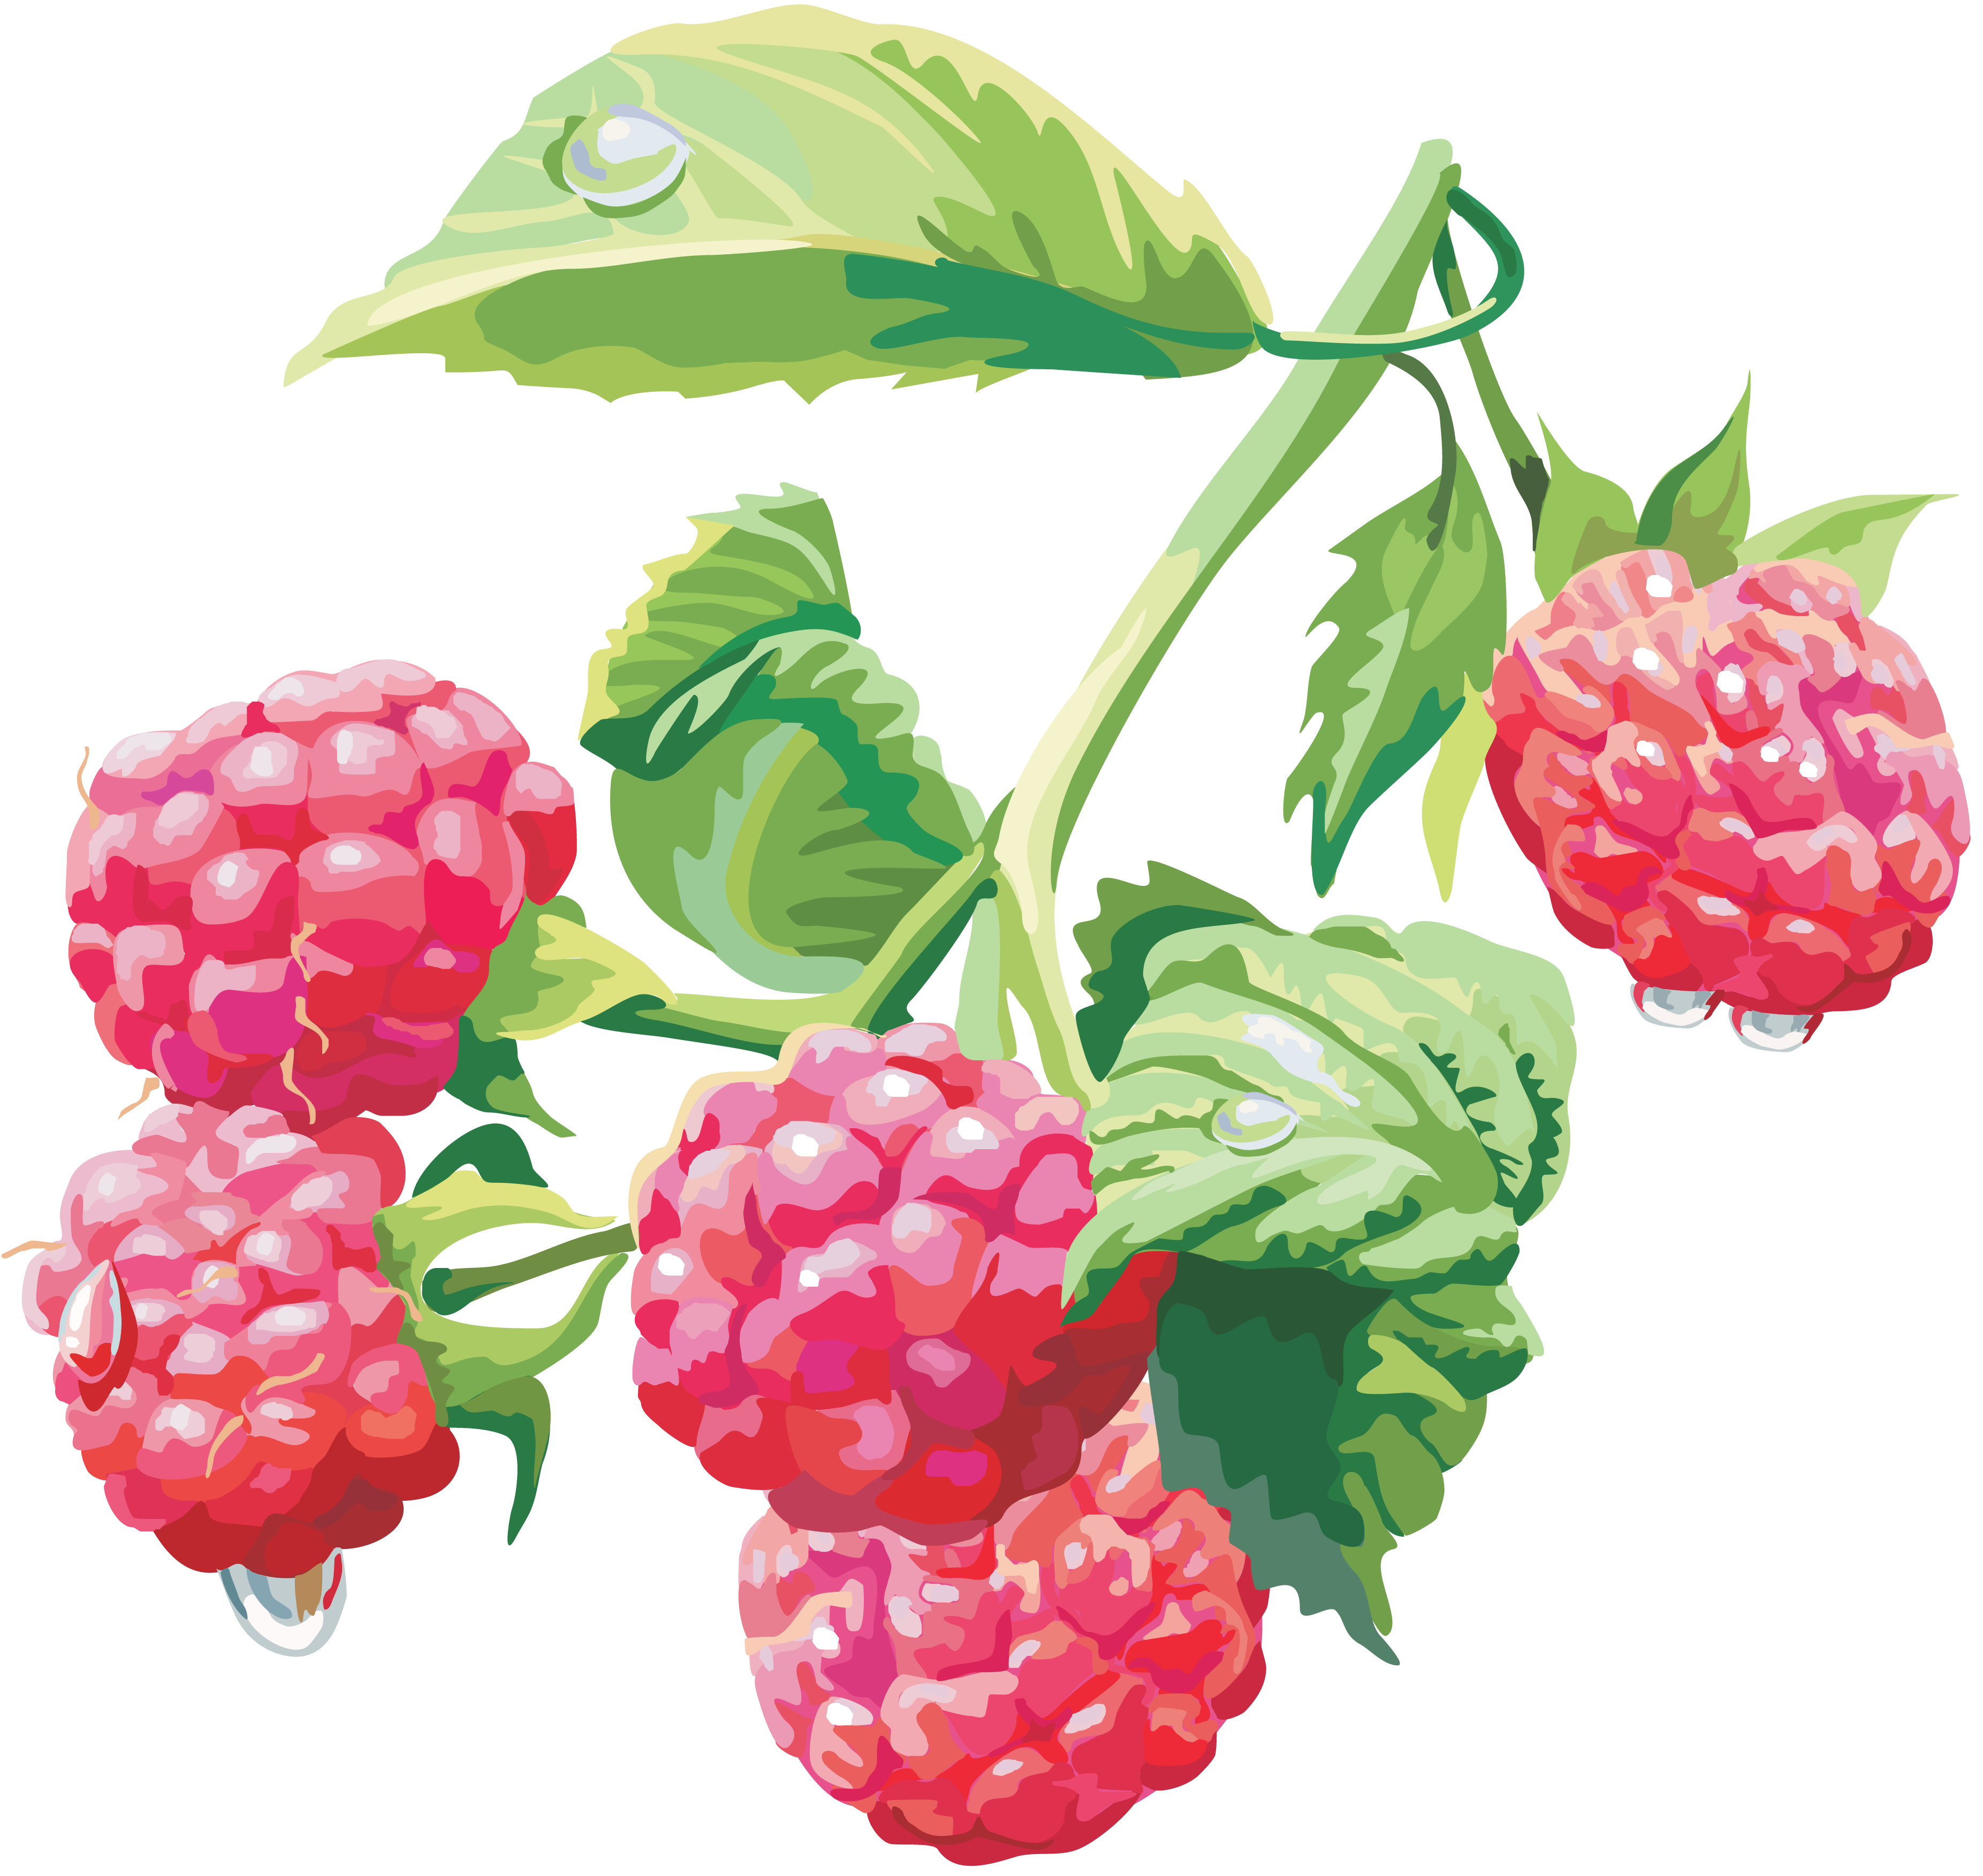 Raspberry PNG image free Download